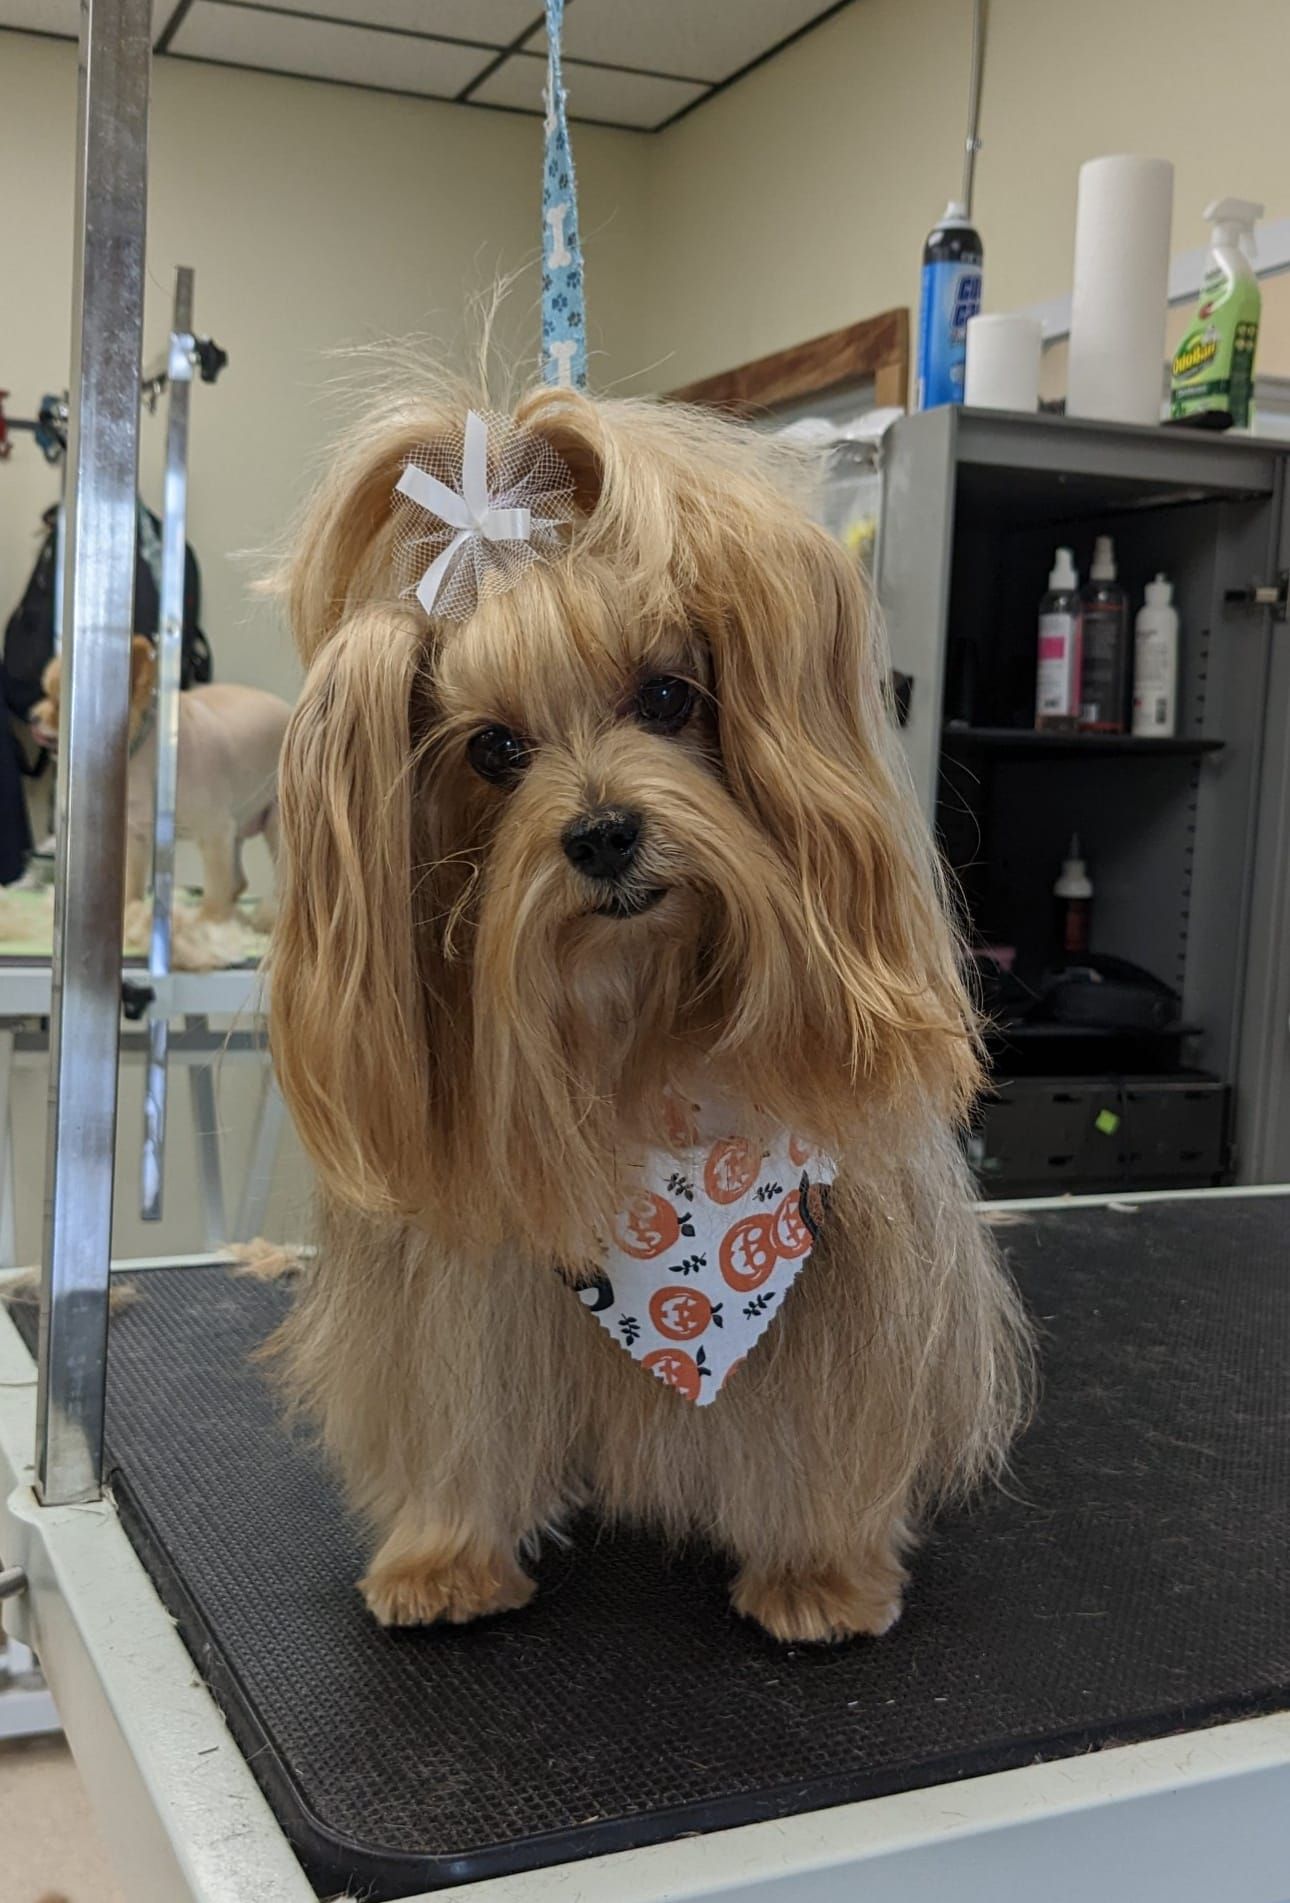 A small brown dog wearing a bandana is sitting on a grooming table.